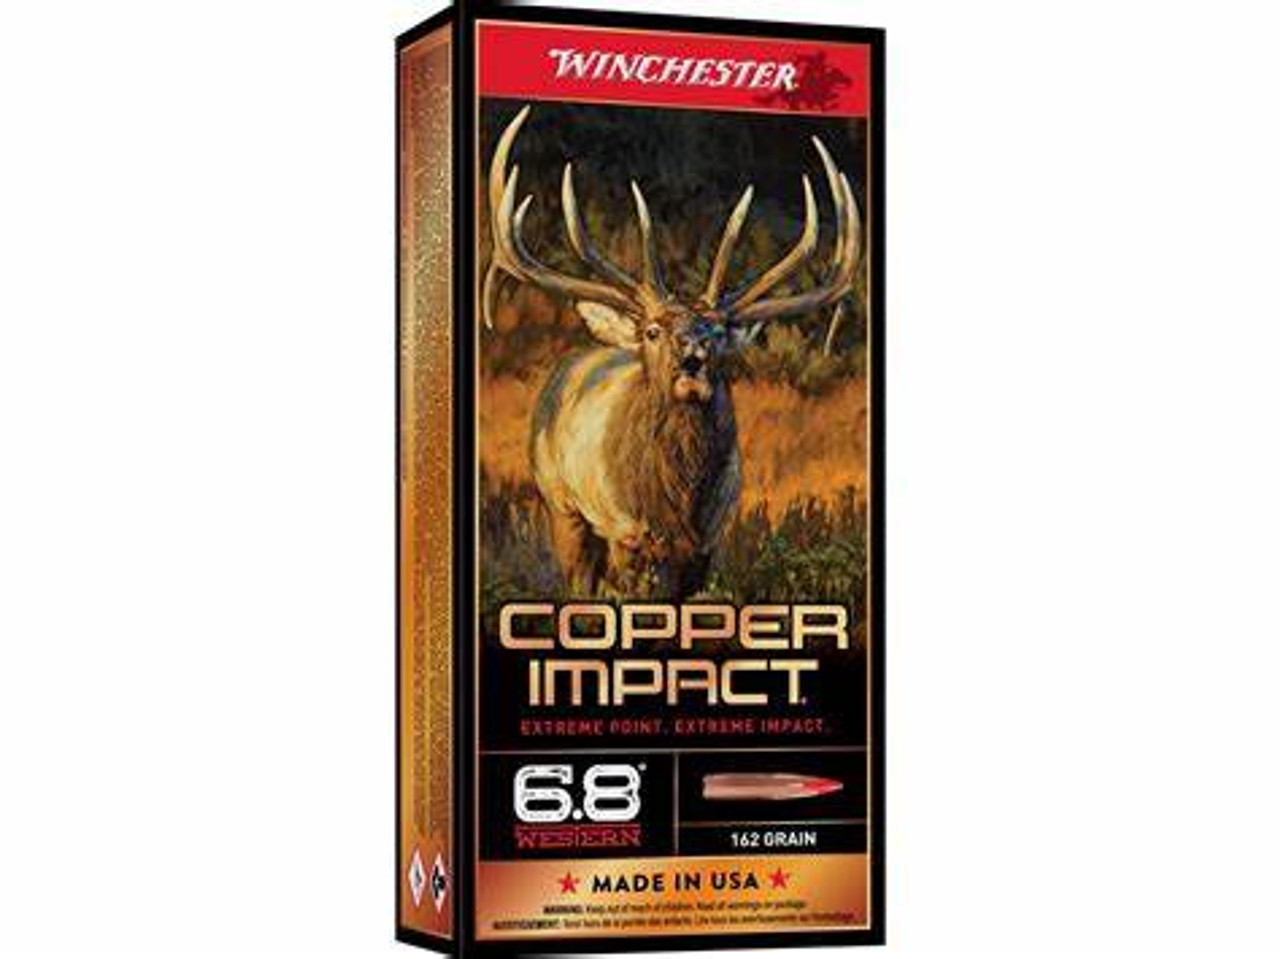 Winchester Copper Impact rifle bullets are engineered with longer ogives and boattails providing higher ballistic coefficients, which increases accuracy at longer distances. With Copper Impact, a hunter gets monolithic solid copper Extreme Point® hollow-point bullets with distinctive polymer tips that create both a large-impact diameter and immediate expansion upon contact. This ammunition is new production, non-corrosive, in boxer primed, reloadable nickel-plated brass cases.

 

As a solid bullet, the Extreme Point produces greater weight retention over standard jacketed bullets. Copper Impact bullets are permitted for use where lead-free ammunition is required, but regardless of location, this line of ammunition performs on big game from pronghorn to elk.

 

Features

Large-impact-diameter Copper Extreme Point expands immediately upon contact to deliver massive knockdown power
Solid copper bullet design offers improved weight retention over standard jacketed lead-core bullets
Product Information
Cartridge	6.8 Western
Grain Weight	162 Grains
Quantity	20 Round
Muzzle Velocity	2875 Feet Per Second
Muzzle Energy	2973 Foot Pounds
Bullet Style	Polymer Tip
Lead Free	Yes
Case Type	Brass
Primer	Boxer
Corrosive	No
Reloadable	Yes
G1 Ballistic Coefficient	0.564
G7 Ballistic Coefficient	0.224
Velocity Rating	Supersonic
Country of Origin	United States of America
